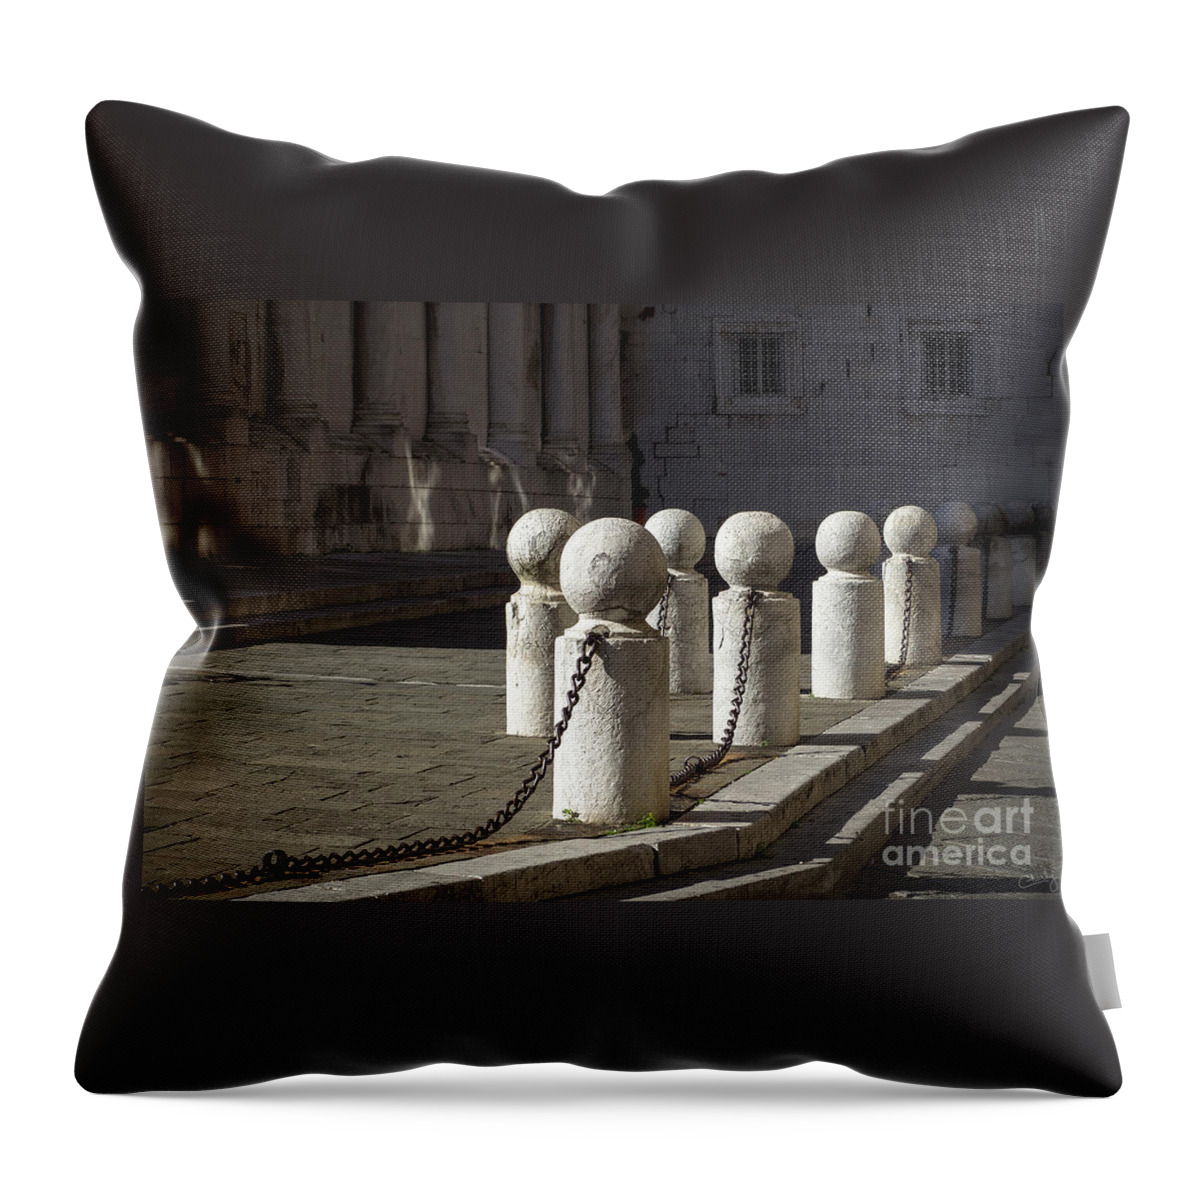 Chained Together Throw Pillow featuring the photograph Chained Together by Prints of Italy